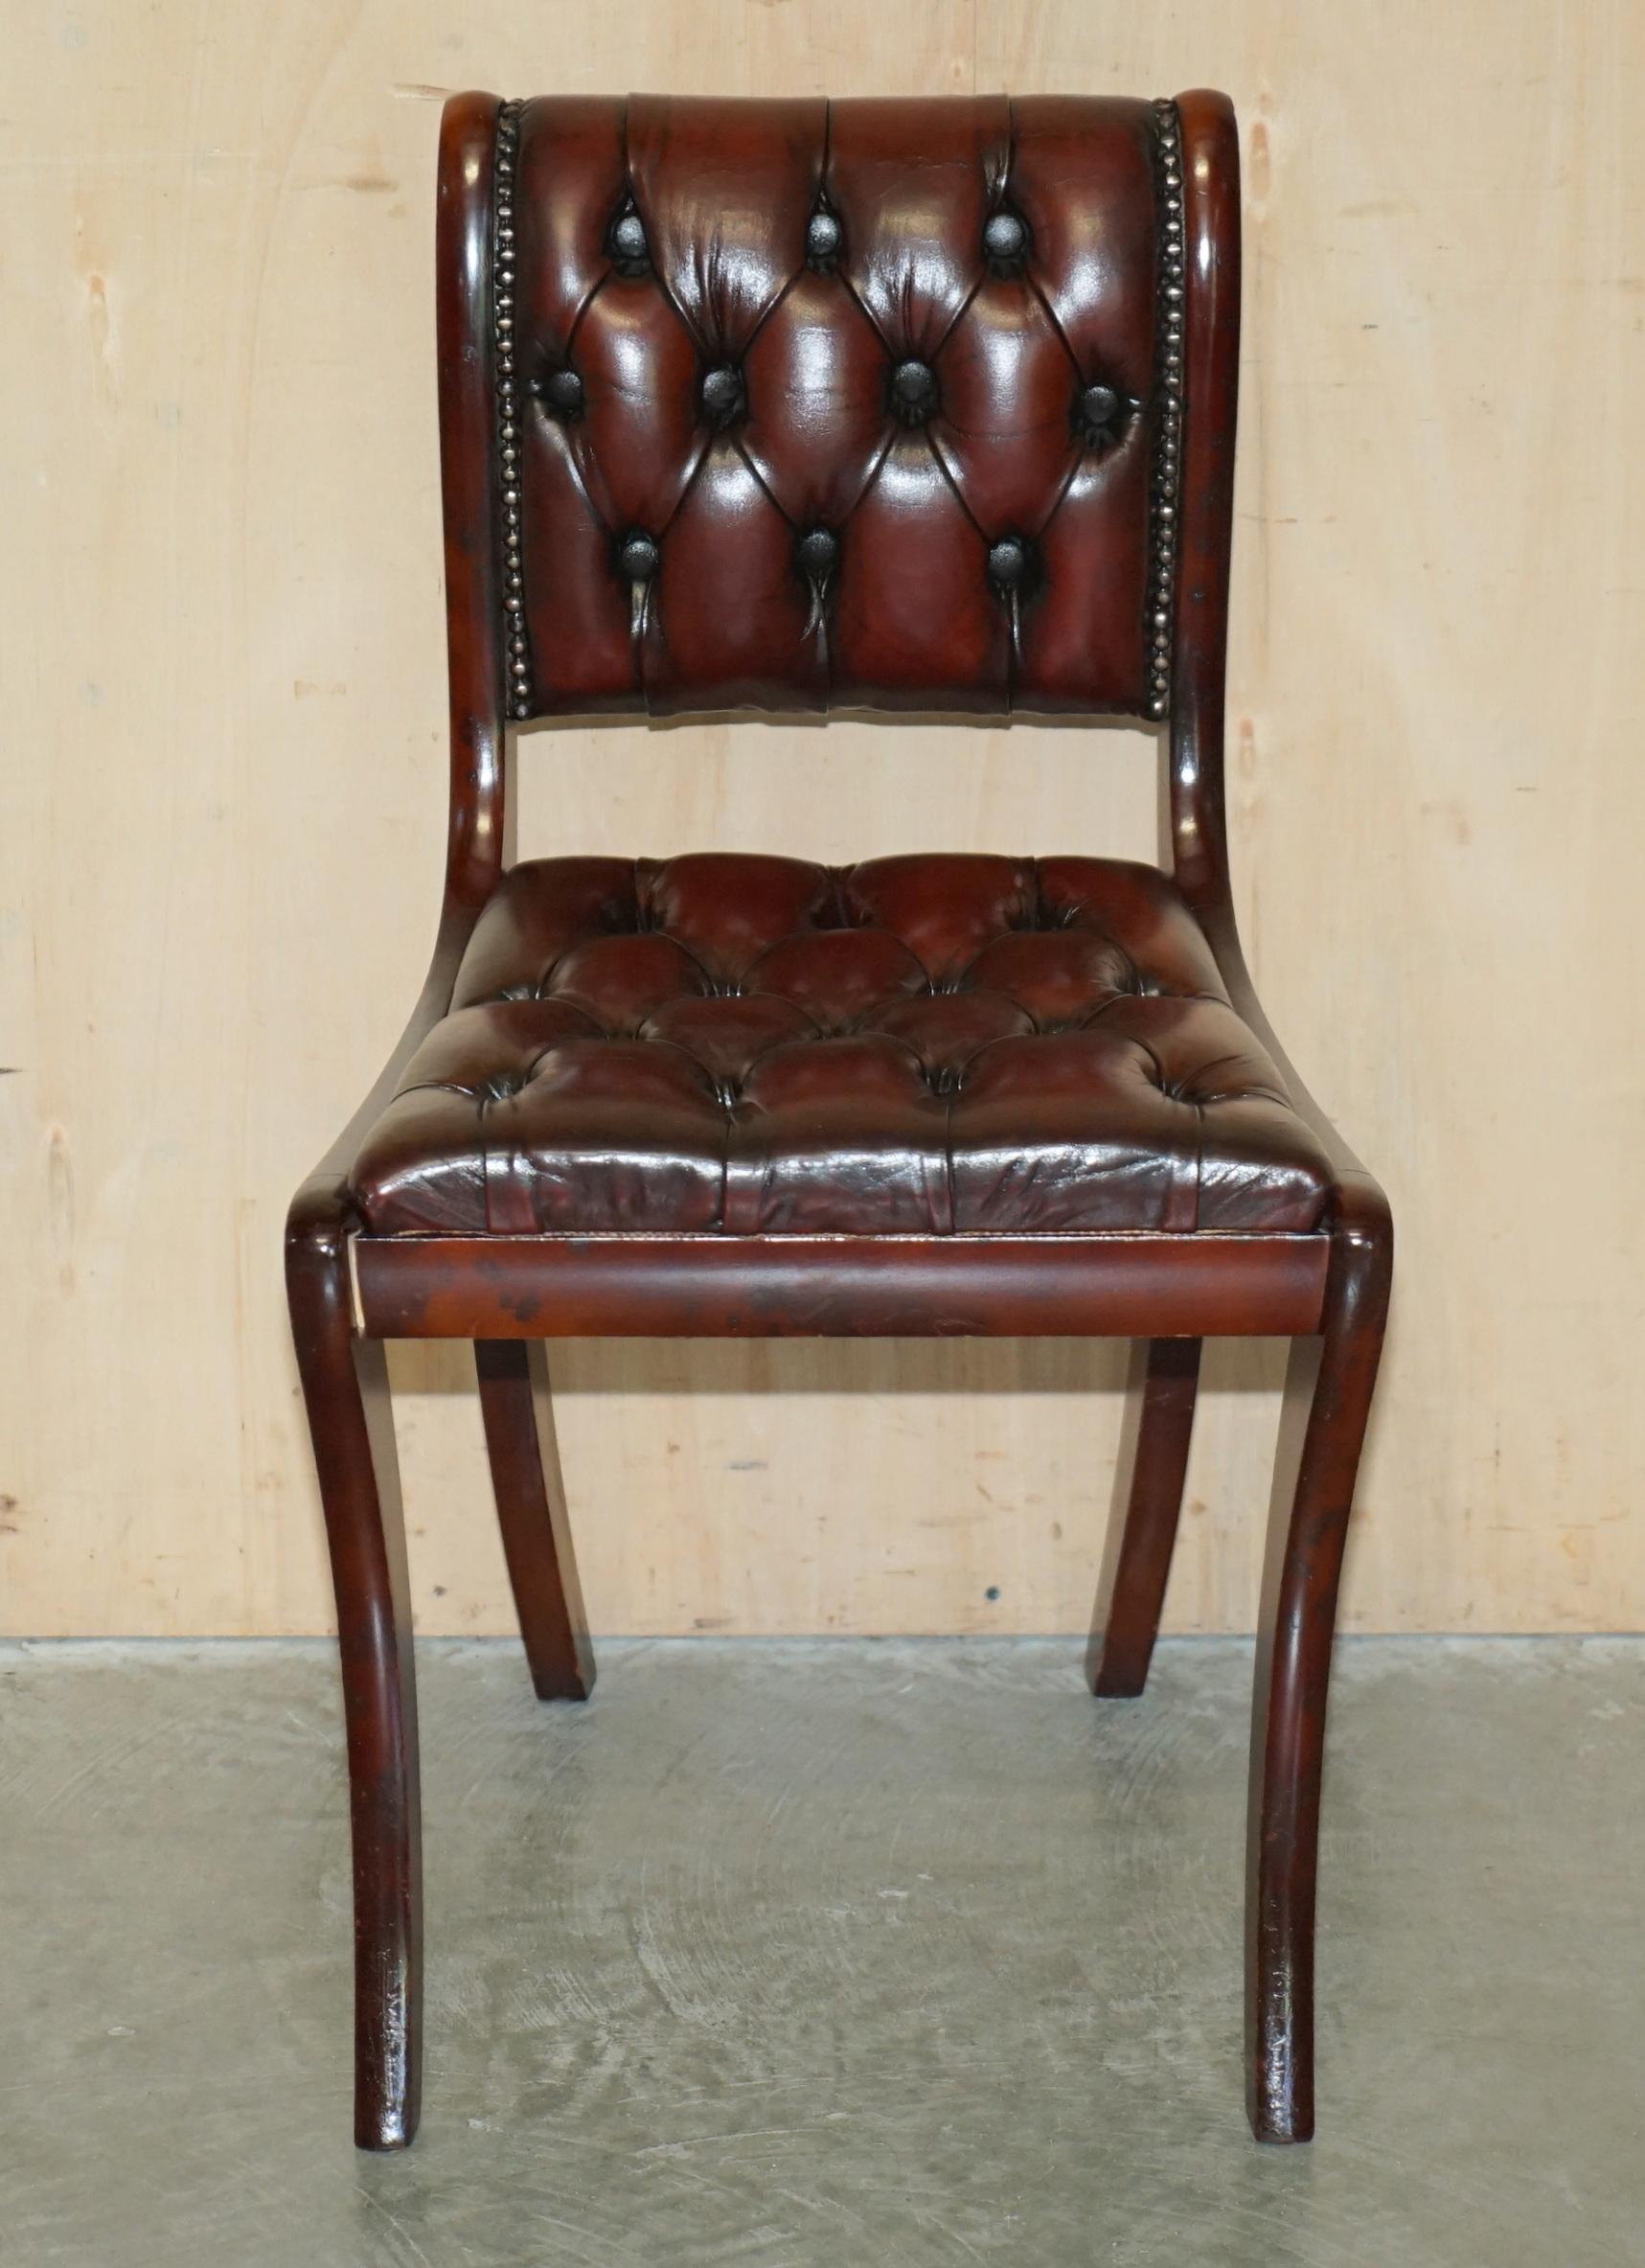 Royal House Antiques

Royal house Antiques is delighted to offer for sale this stunning suite of six Regency style vintage fully restored Chesterfield aged Oxblood leather dining chairs in mahogany 

Please note the delivery fee listed is just a